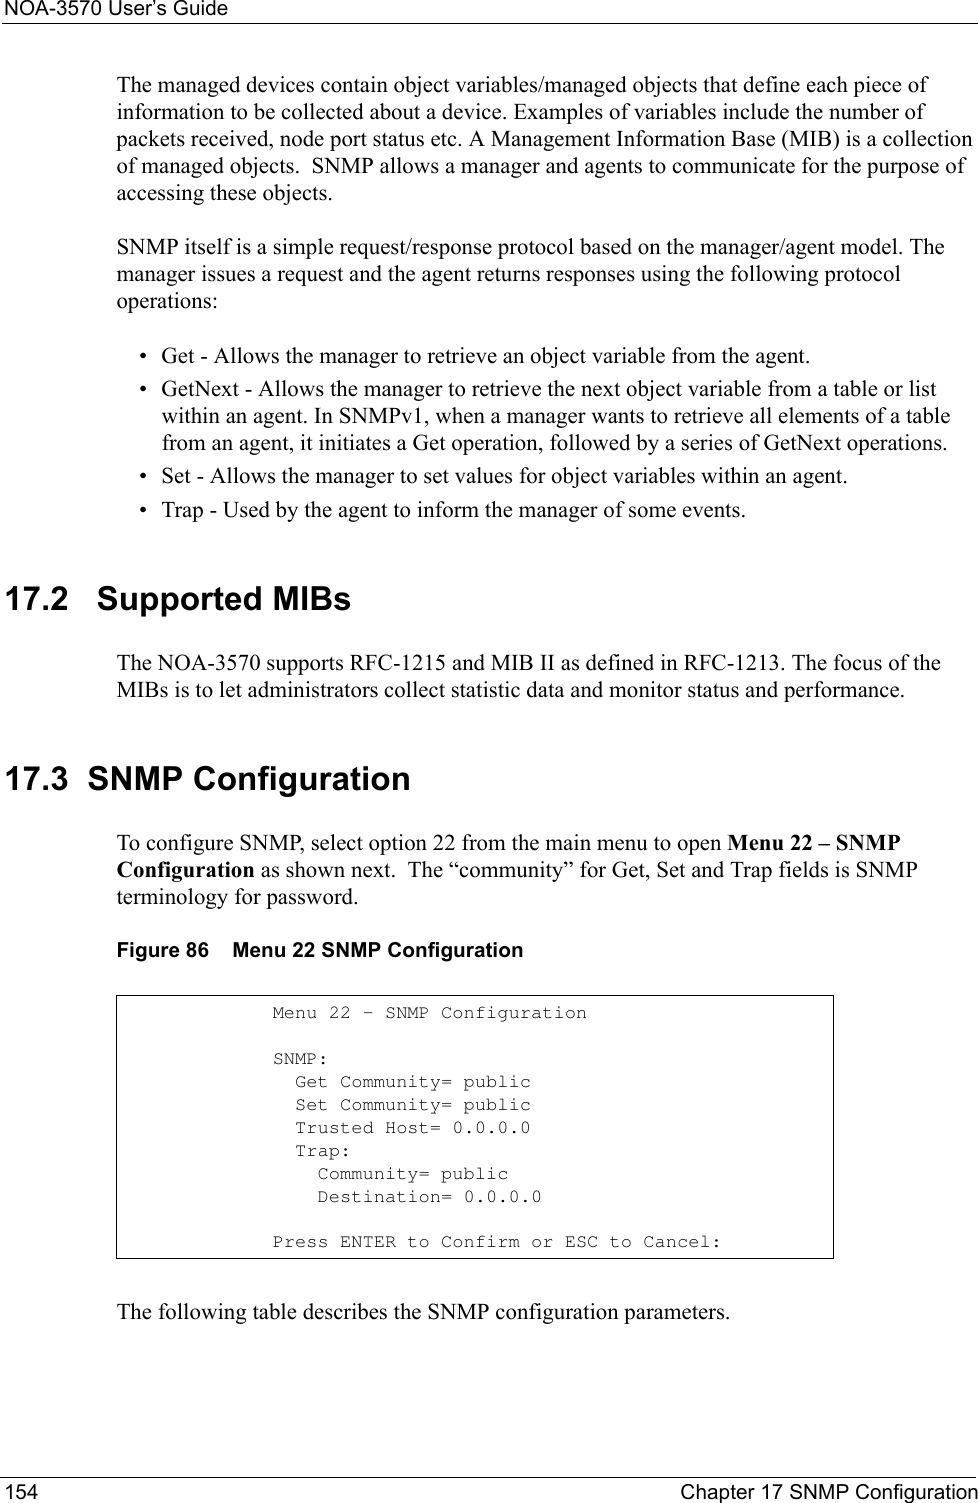 NOA-3570 User’s Guide154 Chapter 17 SNMP ConfigurationThe managed devices contain object variables/managed objects that define each piece of information to be collected about a device. Examples of variables include the number of packets received, node port status etc. A Management Information Base (MIB) is a collection of managed objects.  SNMP allows a manager and agents to communicate for the purpose of accessing these objects.SNMP itself is a simple request/response protocol based on the manager/agent model. The manager issues a request and the agent returns responses using the following protocol operations:• Get - Allows the manager to retrieve an object variable from the agent. • GetNext - Allows the manager to retrieve the next object variable from a table or list within an agent. In SNMPv1, when a manager wants to retrieve all elements of a table from an agent, it initiates a Get operation, followed by a series of GetNext operations. • Set - Allows the manager to set values for object variables within an agent. • Trap - Used by the agent to inform the manager of some events.17.2   Supported MIBsThe NOA-3570 supports RFC-1215 and MIB II as defined in RFC-1213. The focus of the MIBs is to let administrators collect statistic data and monitor status and performance.17.3  SNMP ConfigurationTo configure SNMP, select option 22 from the main menu to open Menu 22 – SNMP Configuration as shown next.  The “community” for Get, Set and Trap fields is SNMP terminology for password.Figure 86    Menu 22 SNMP ConfigurationThe following table describes the SNMP configuration parameters.Menu 22 - SNMP ConfigurationSNMP:  Get Community= public  Set Community= public  Trusted Host= 0.0.0.0  Trap:    Community= public    Destination= 0.0.0.0Press ENTER to Confirm or ESC to Cancel: